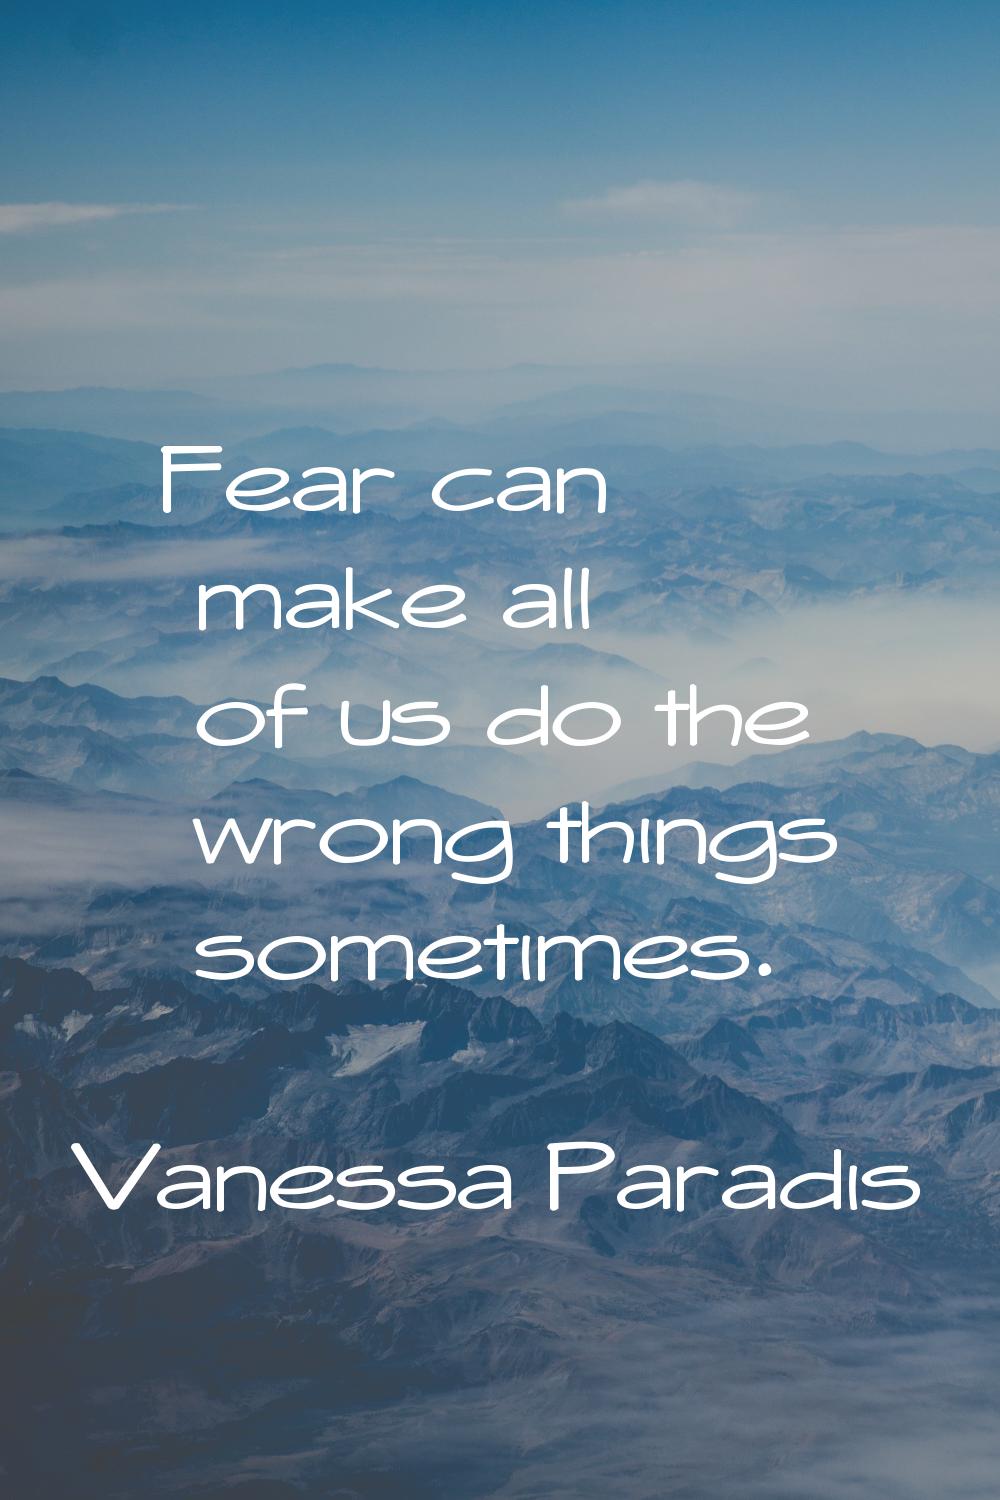 Fear can make all of us do the wrong things sometimes.